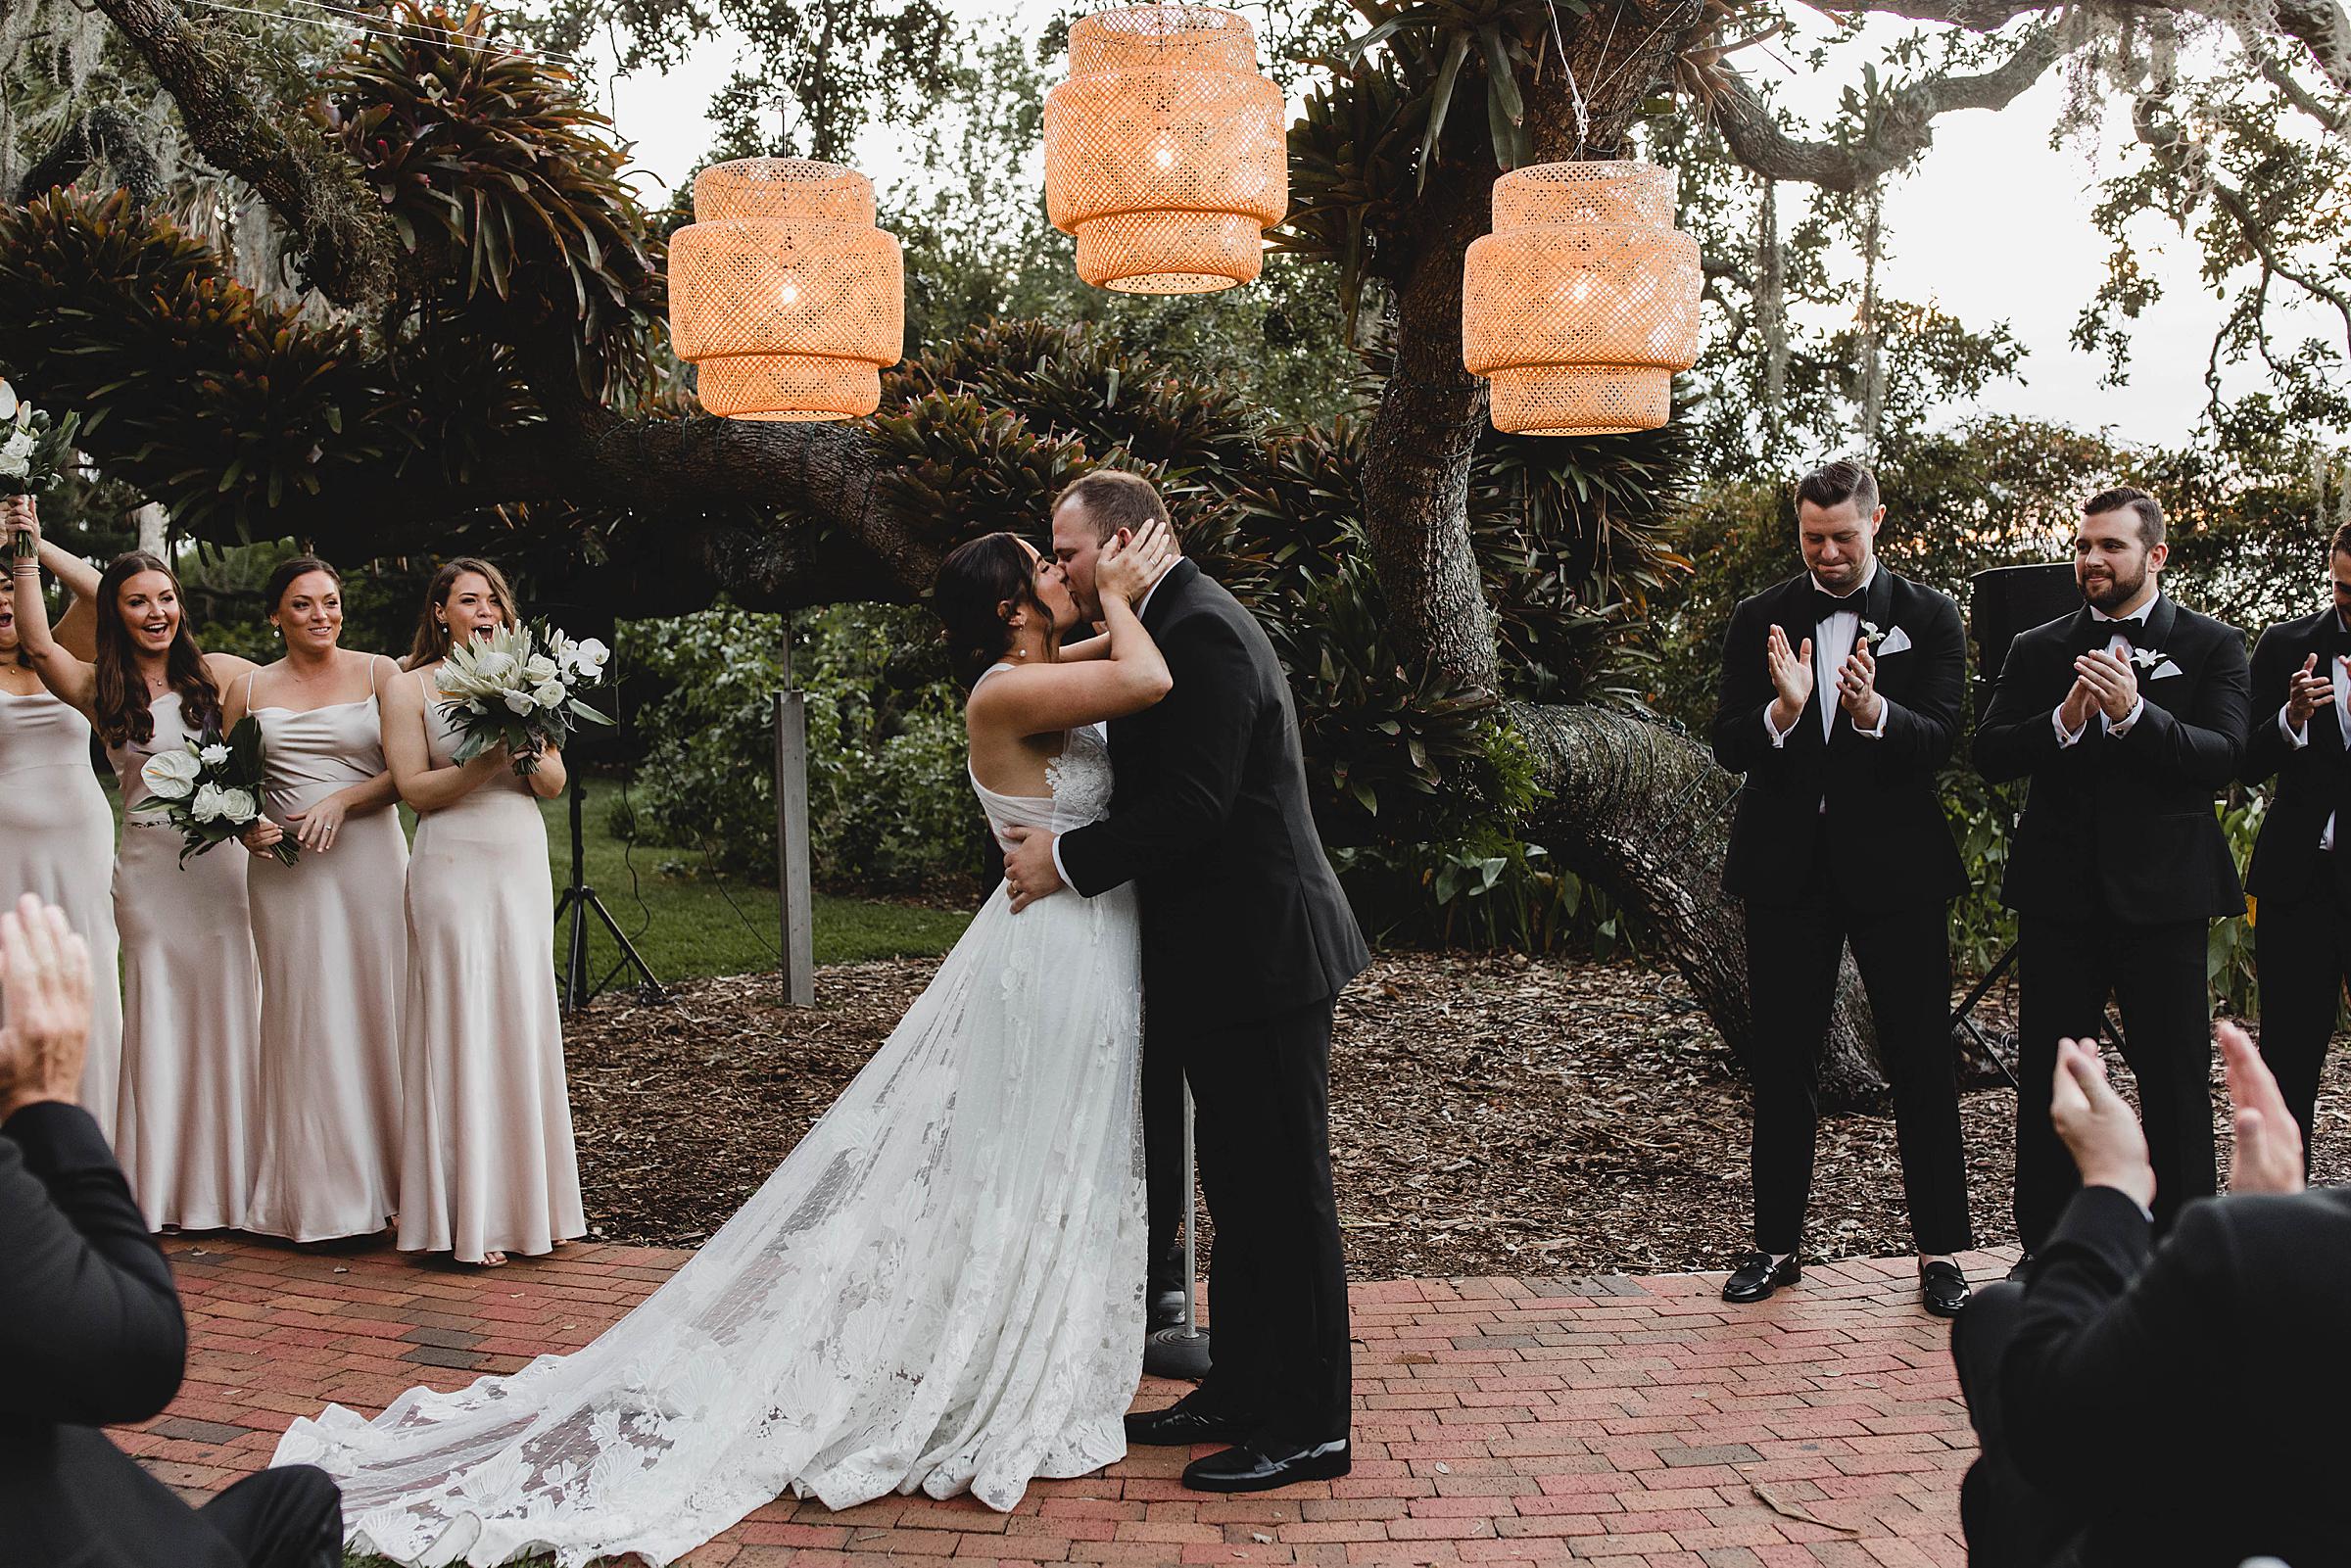 Bride and groom's first kiss at the end of ceremony at Selby Gardens wedding